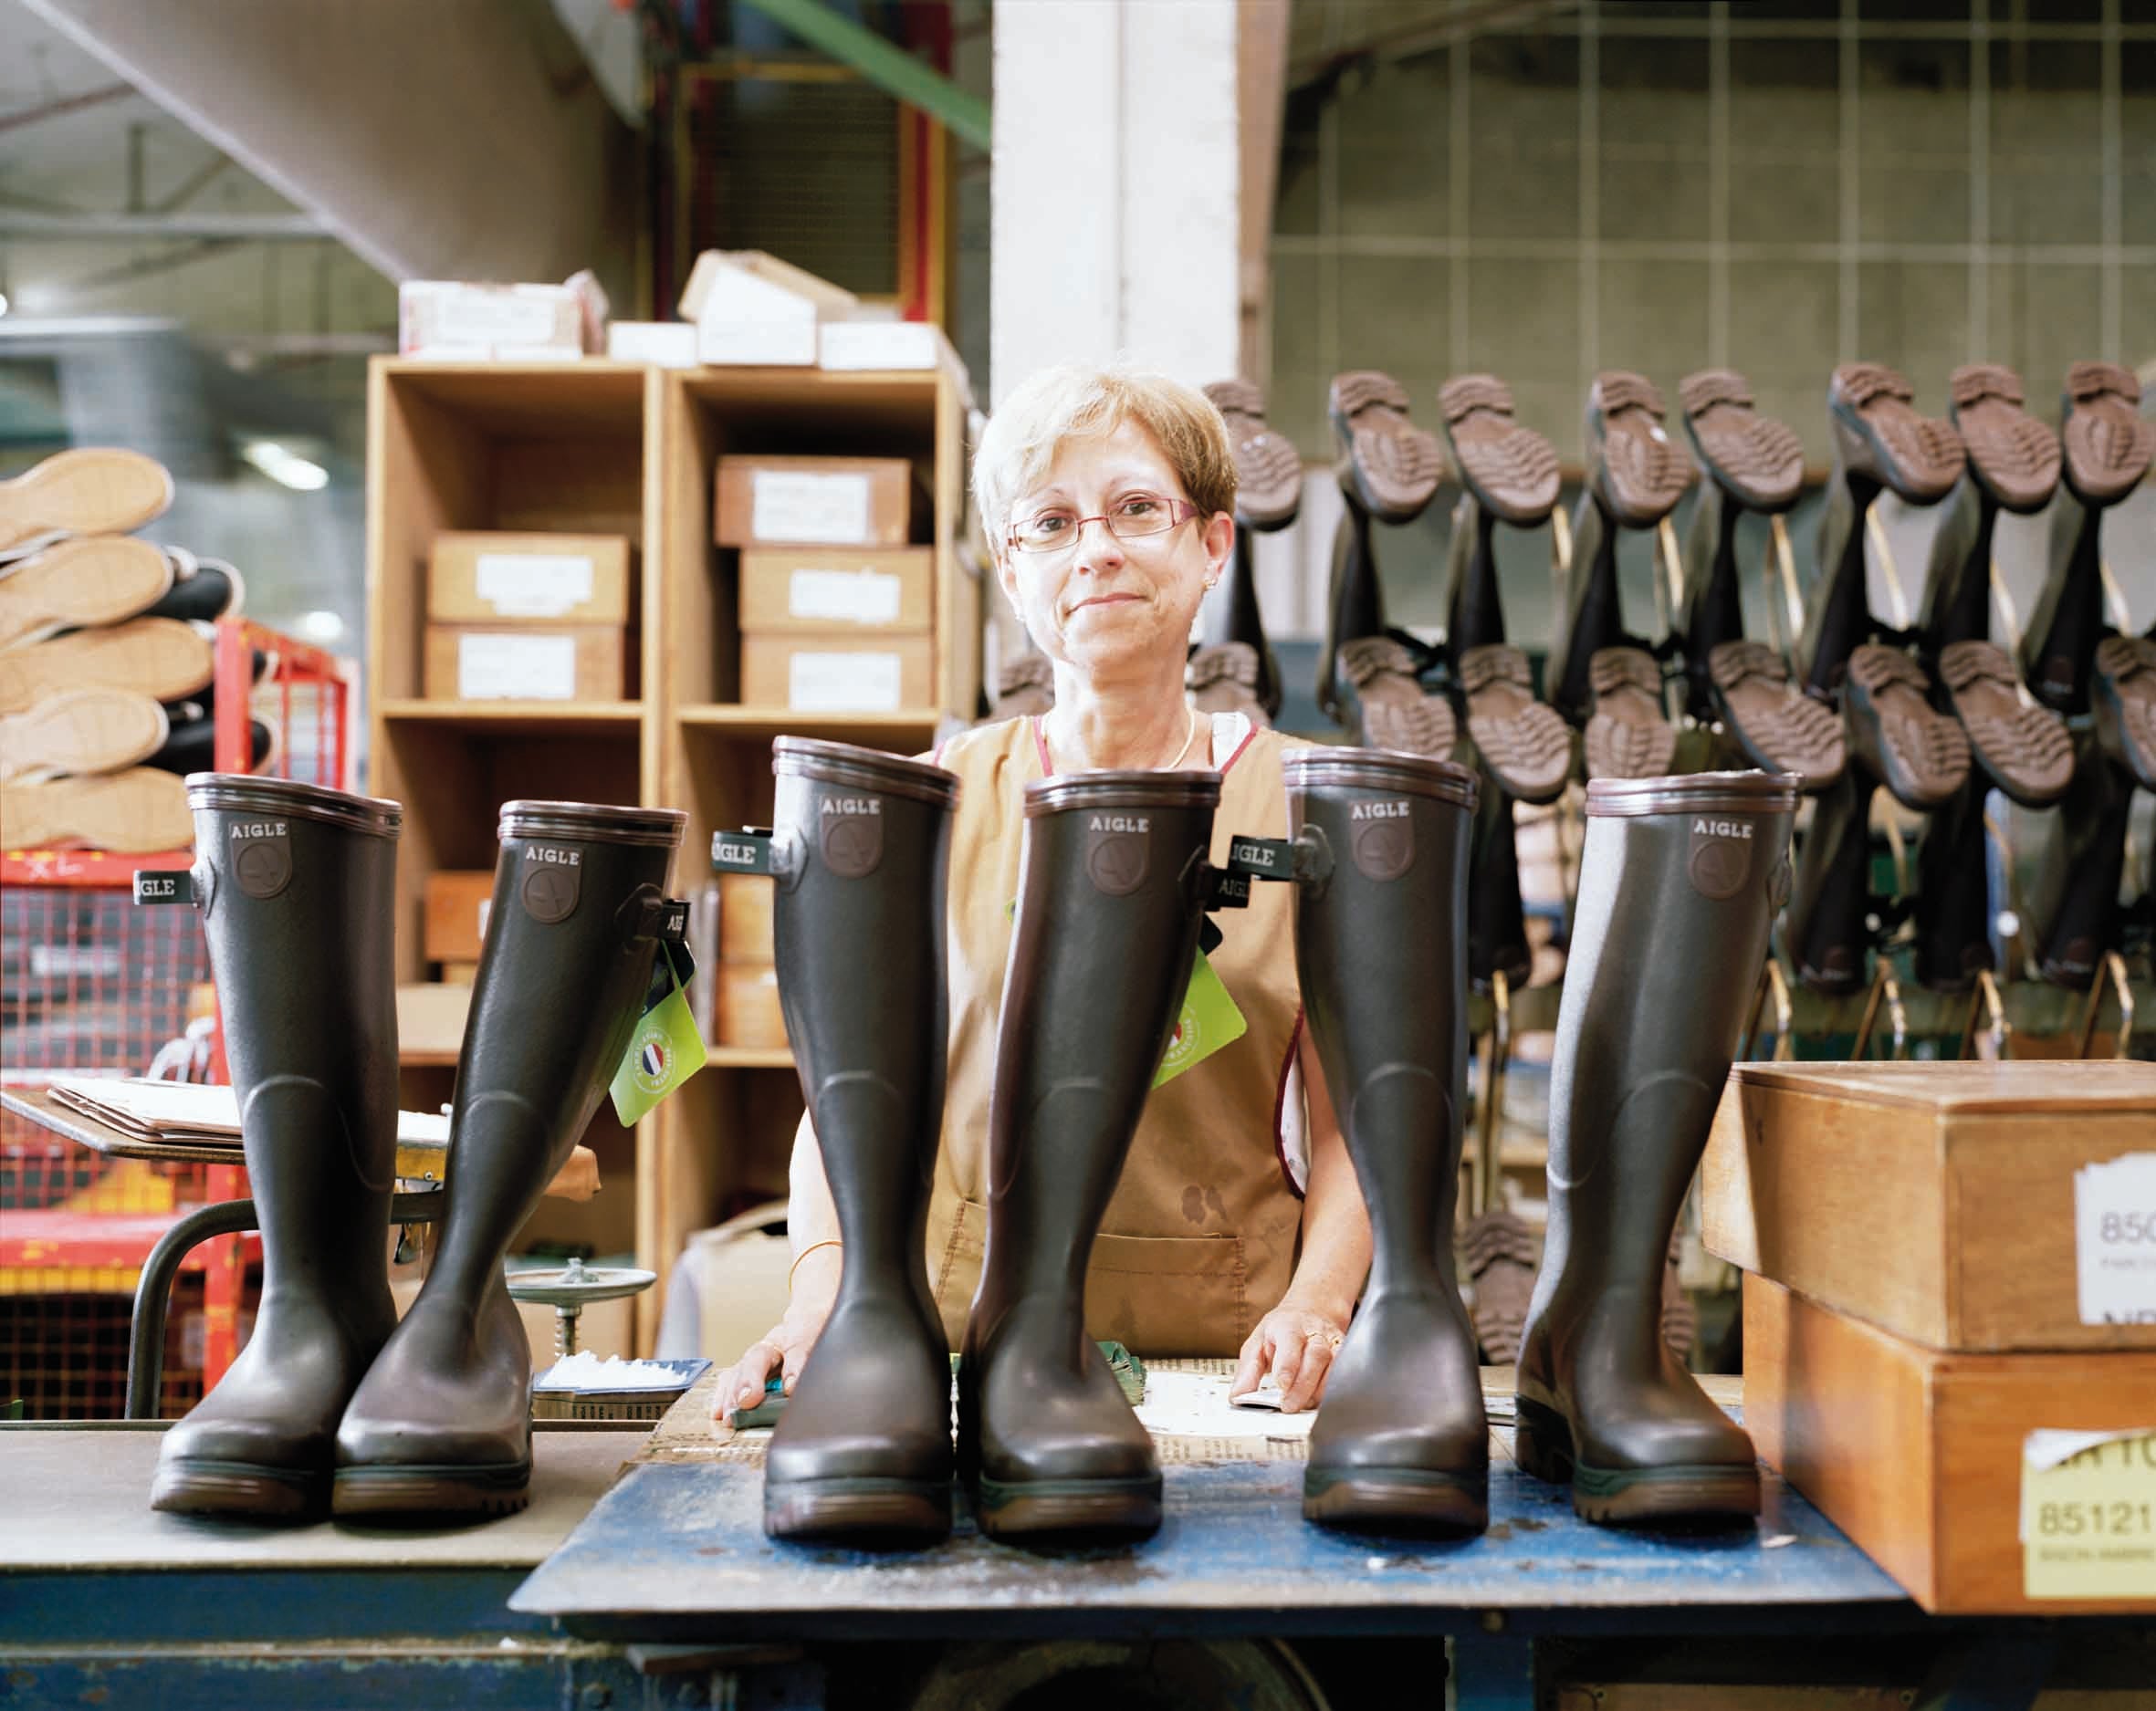 Aigle newly completed wellingtons